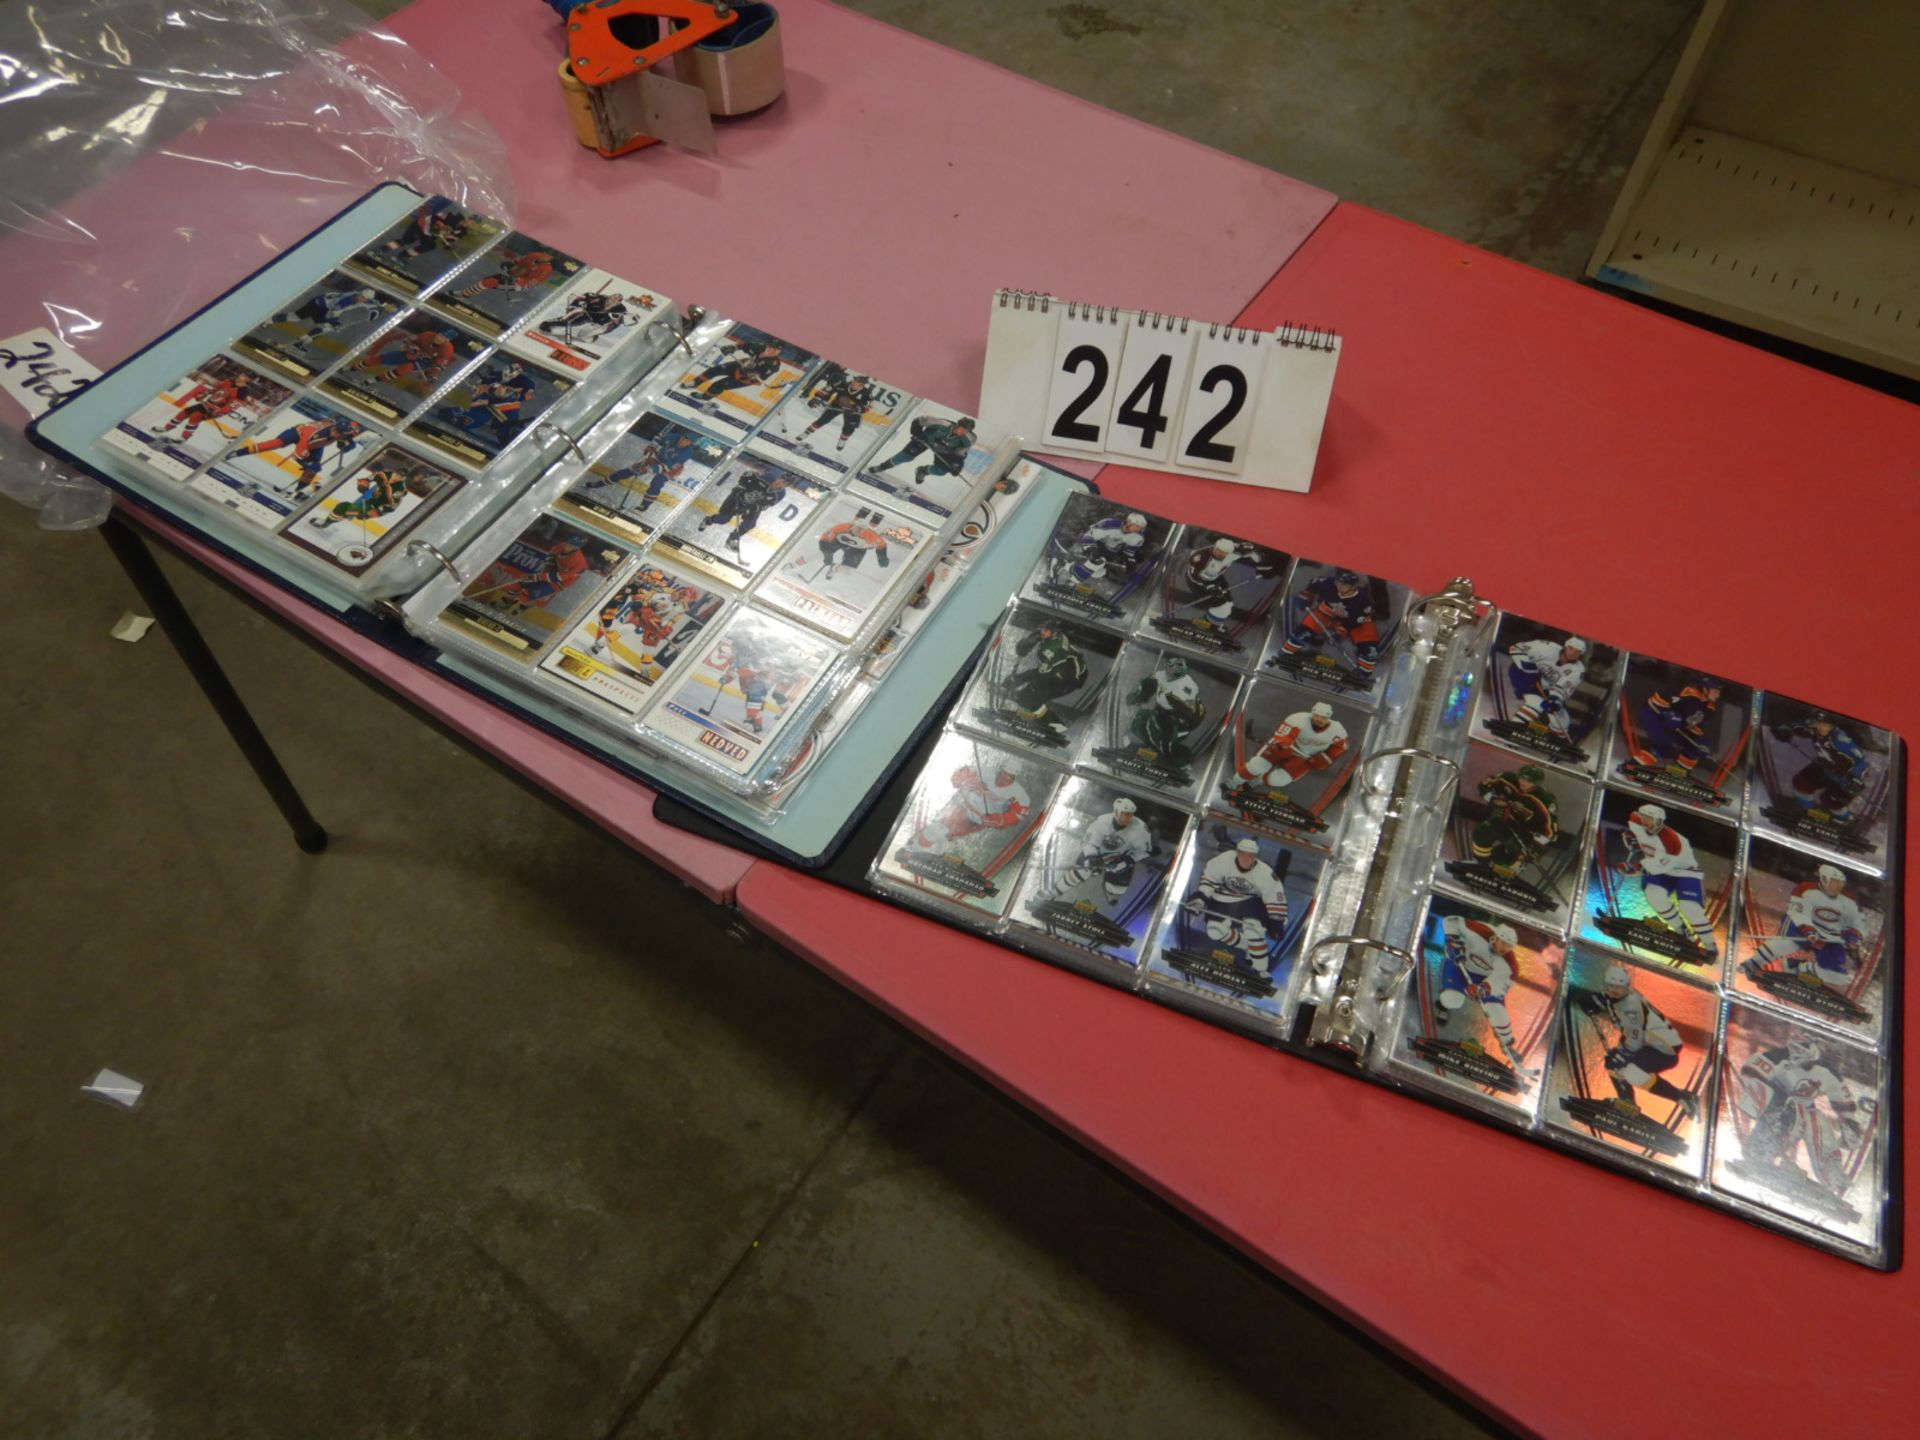 2 BINDERS OF SPORTS TRADING CARDS - B22